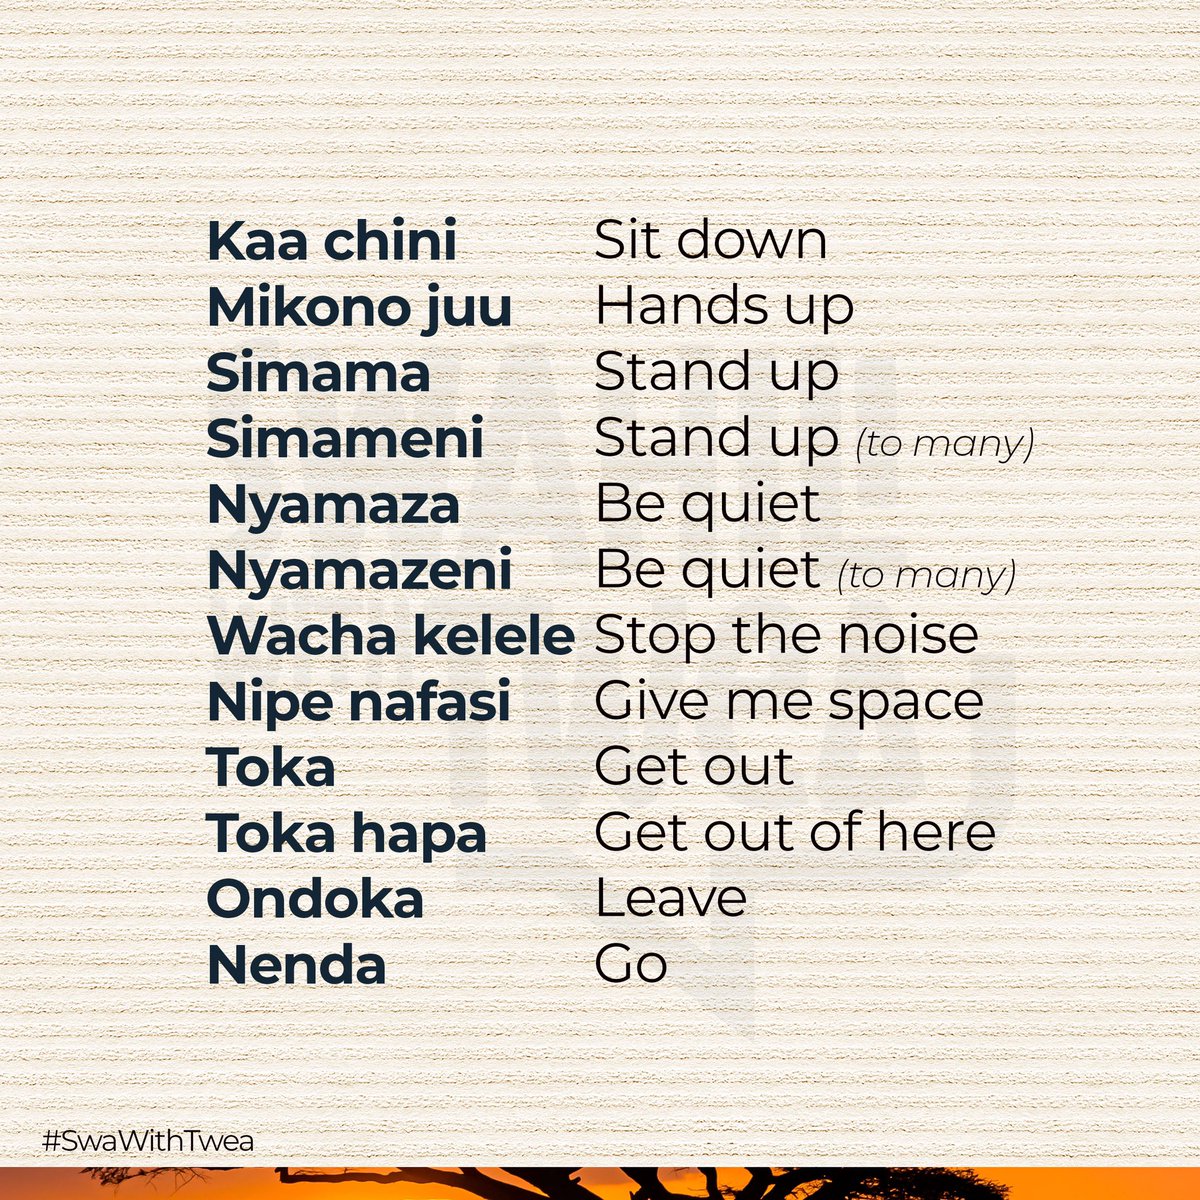 Hamjambo 
More #Swahili phrases for daily use & their meaning based translation 
#SwaWithTwea